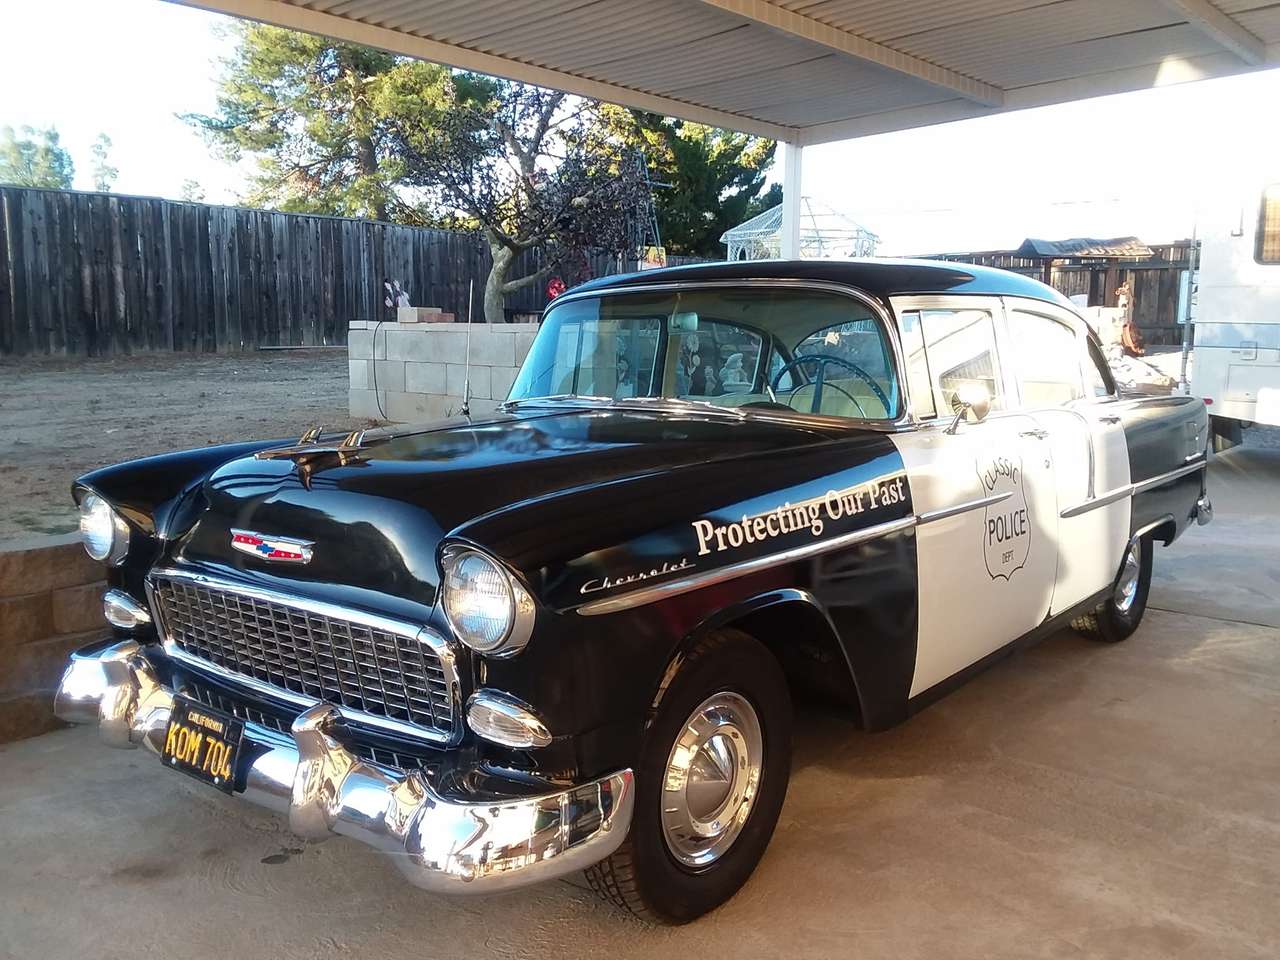 1955 chevy police car online puzzle